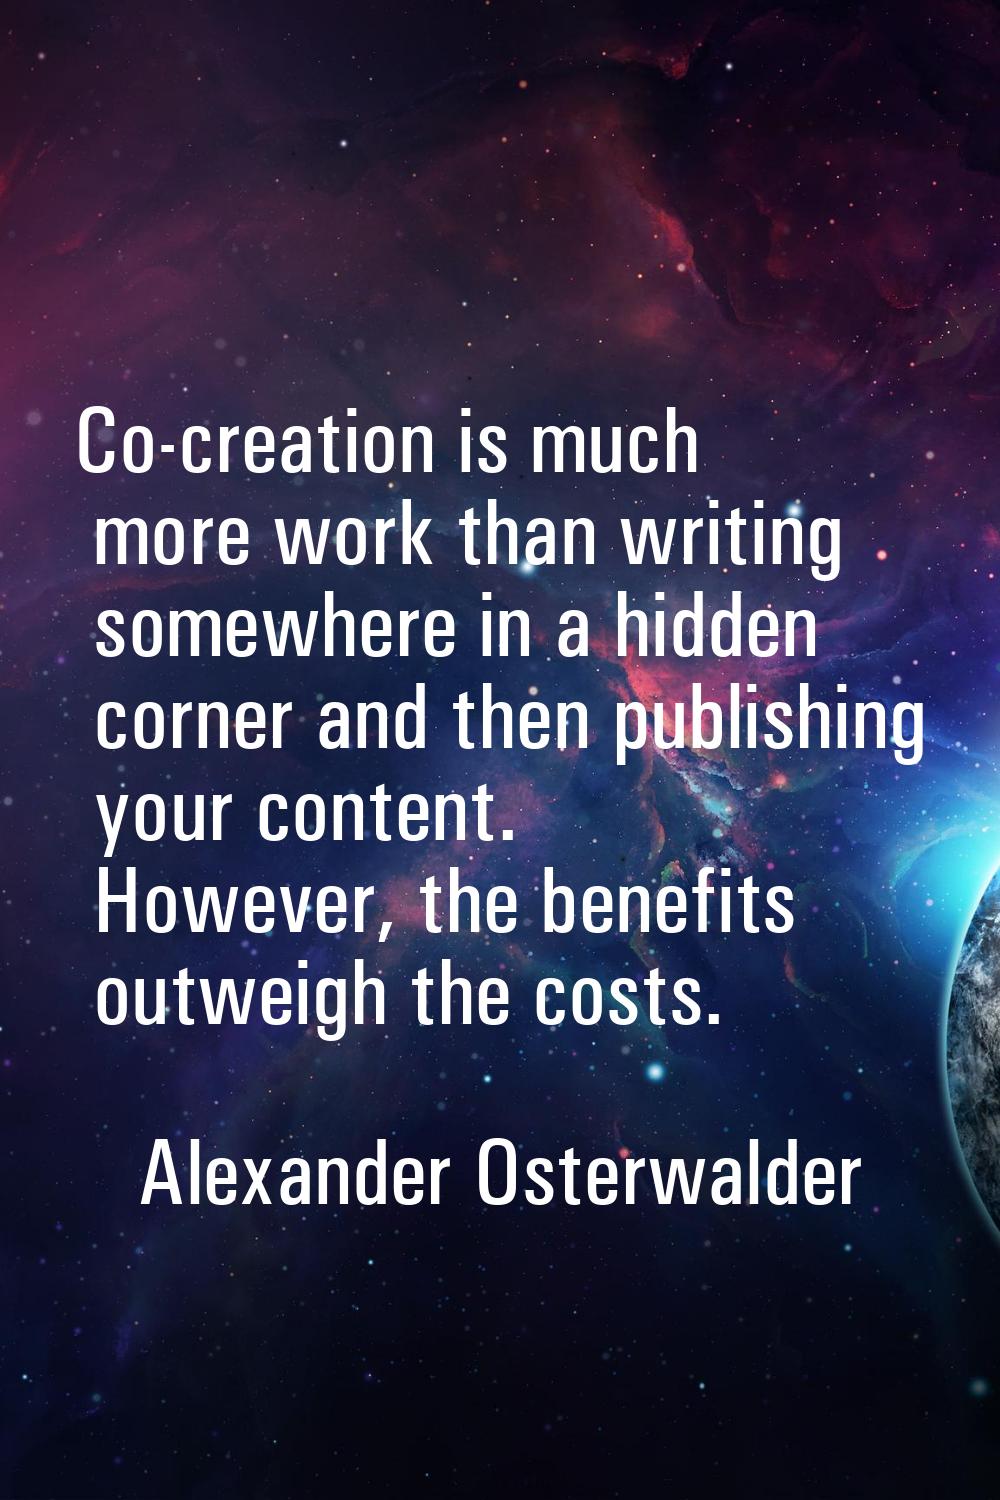 Co-creation is much more work than writing somewhere in a hidden corner and then publishing your co